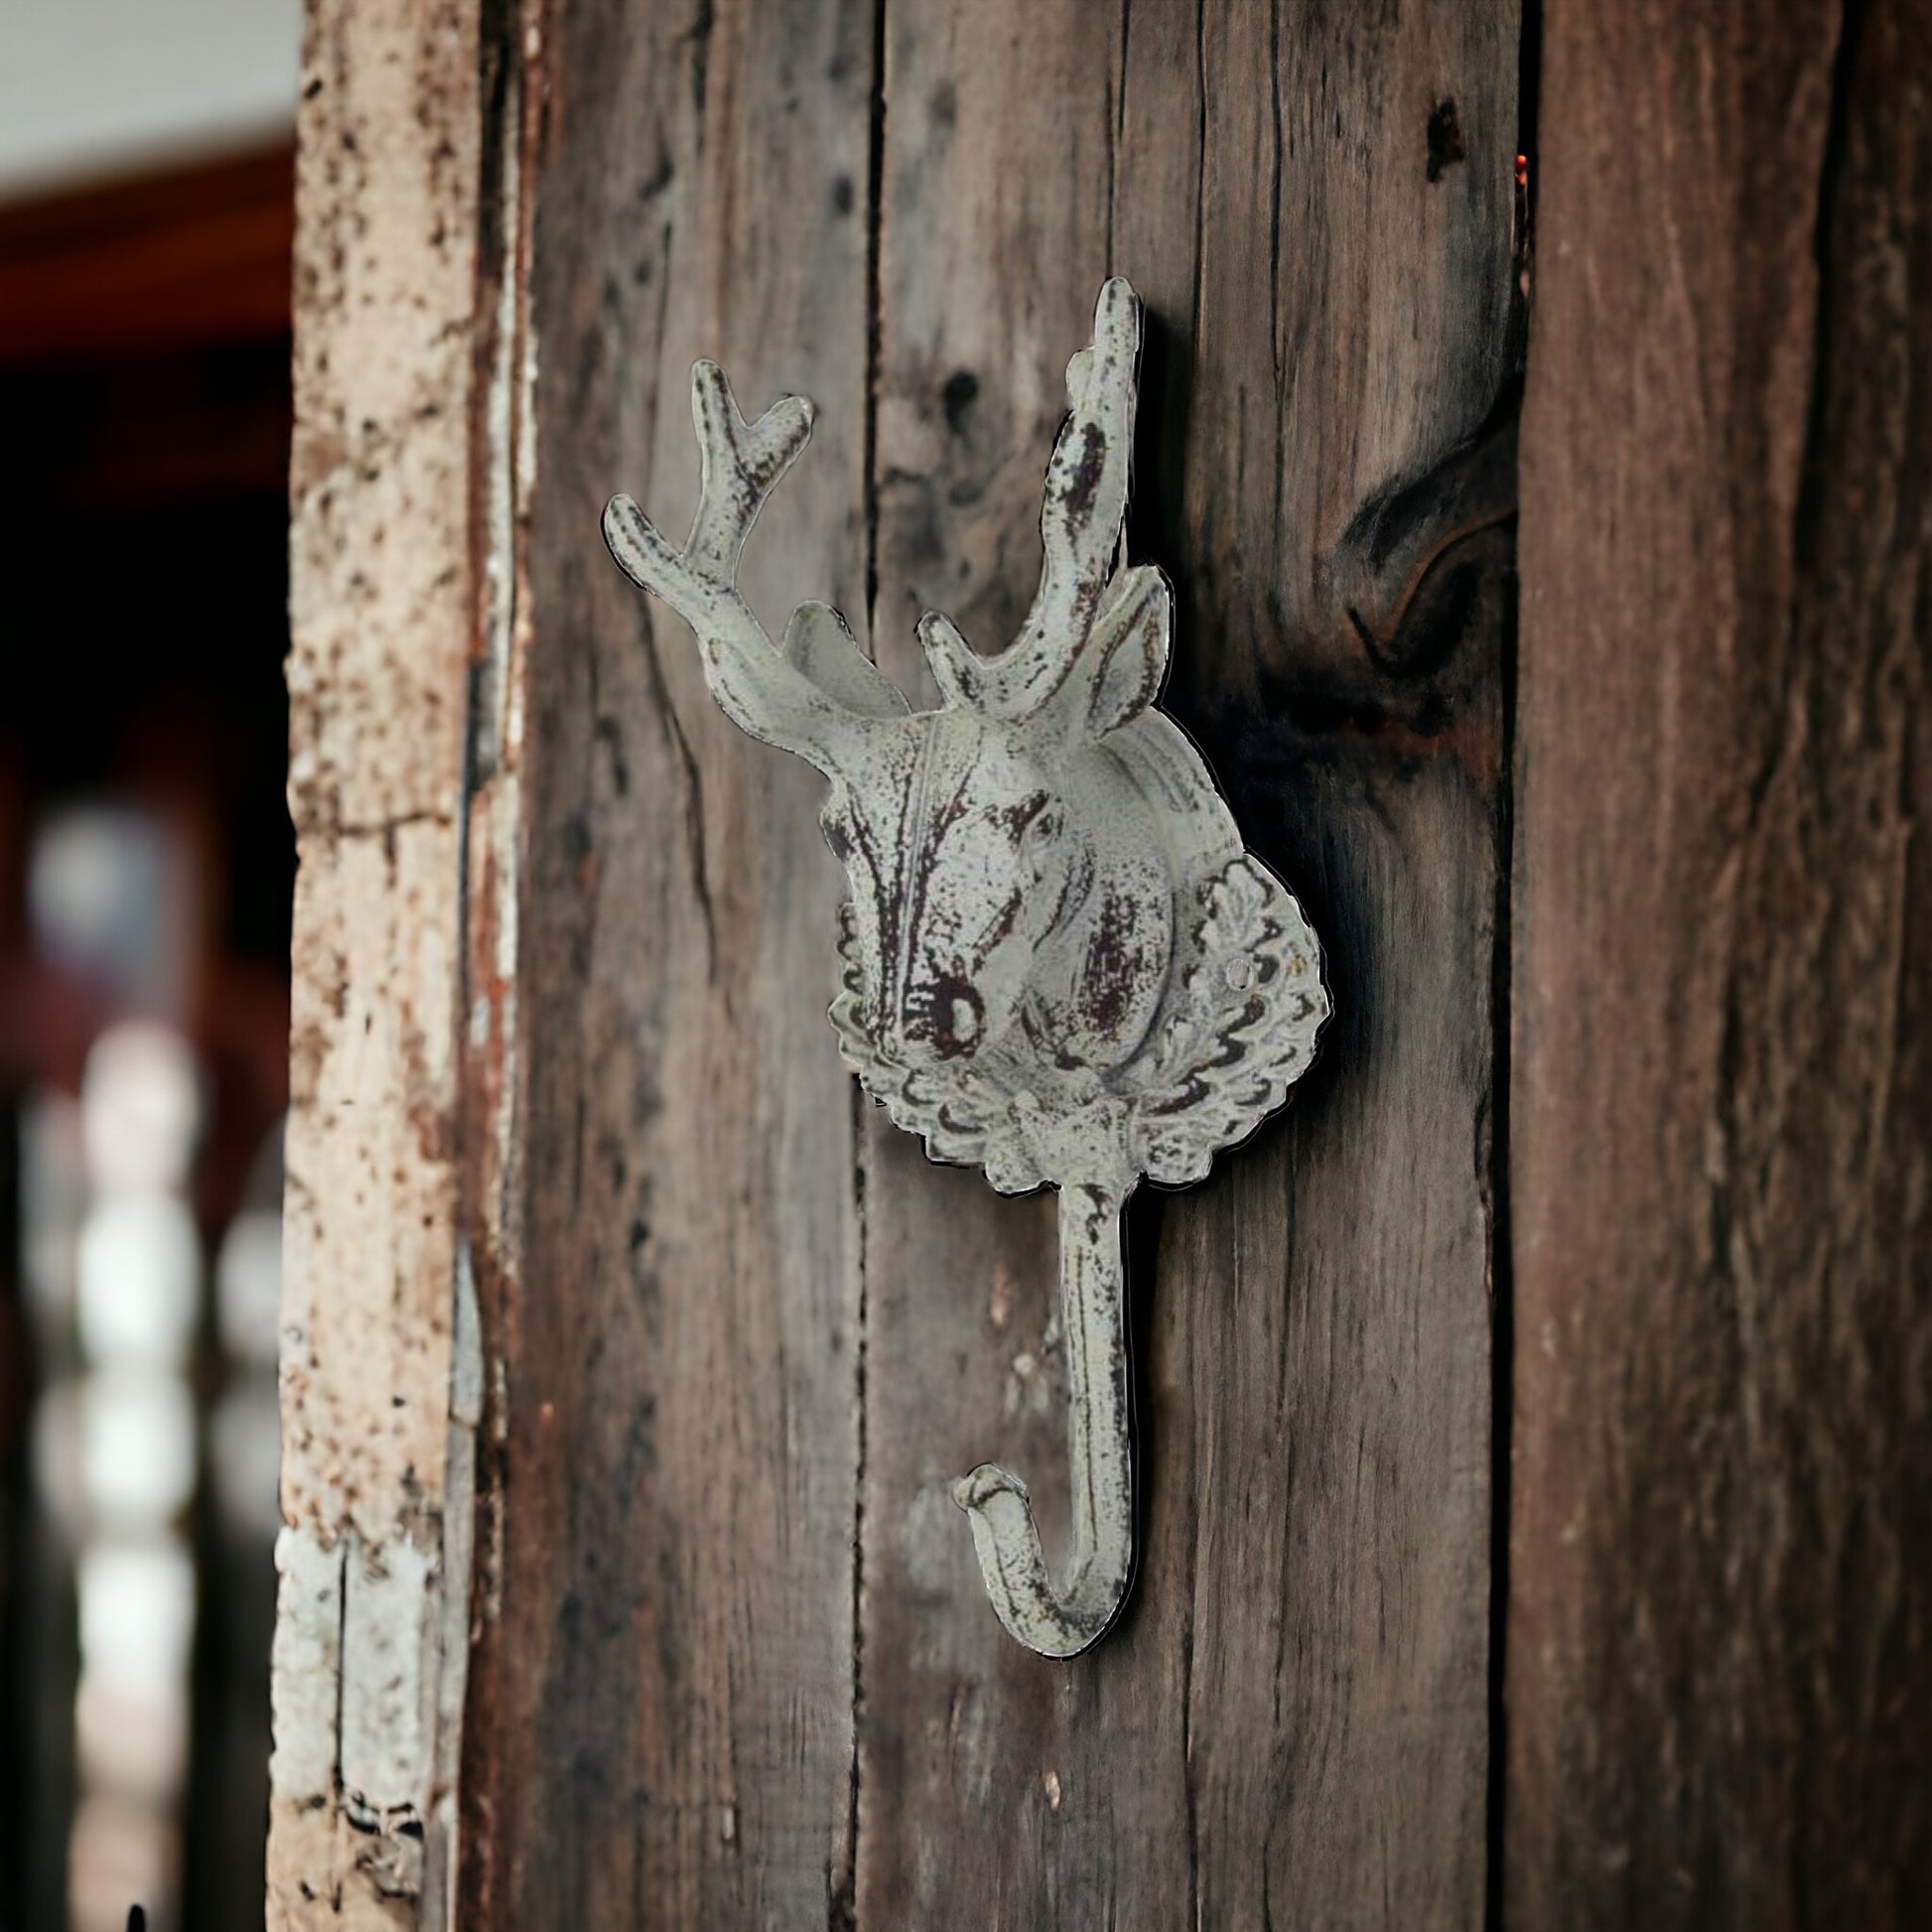 Deer Stag Hook Rustic Antique - The Renmy Store Homewares & Gifts 